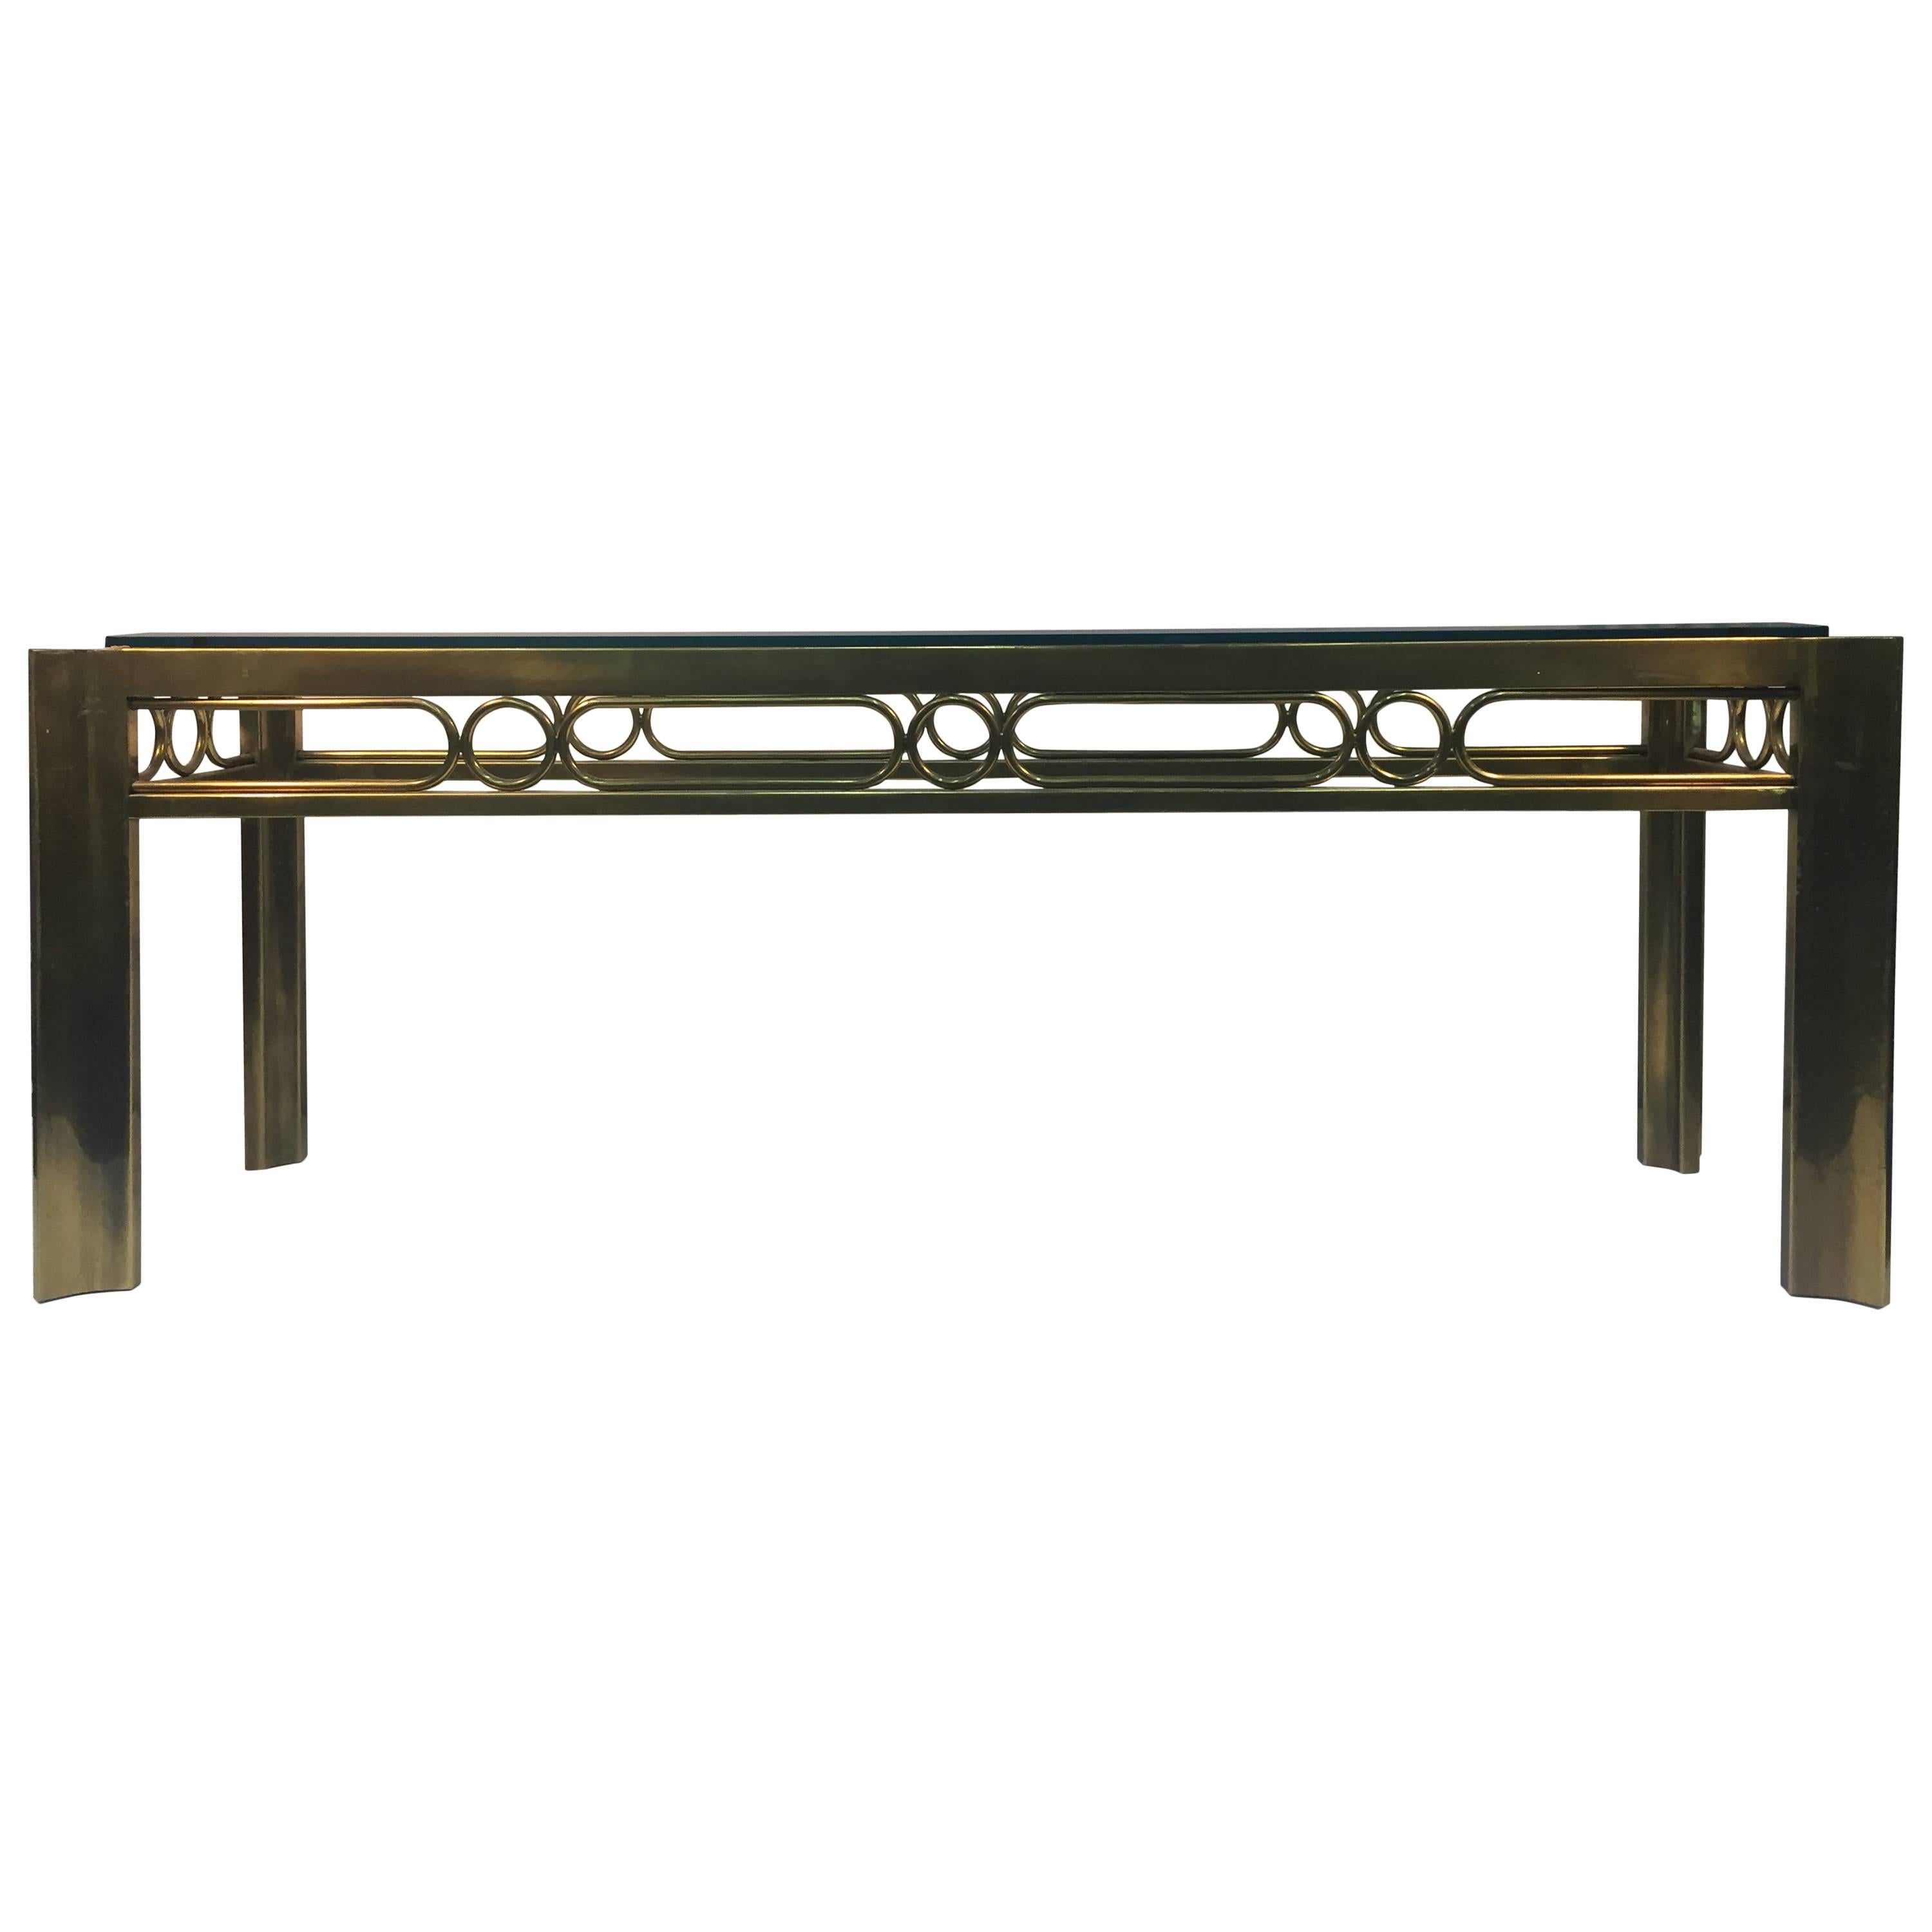 Terrific Brass and Mixed-Metal Console Table with Unusual Design by Mastercraft For Sale